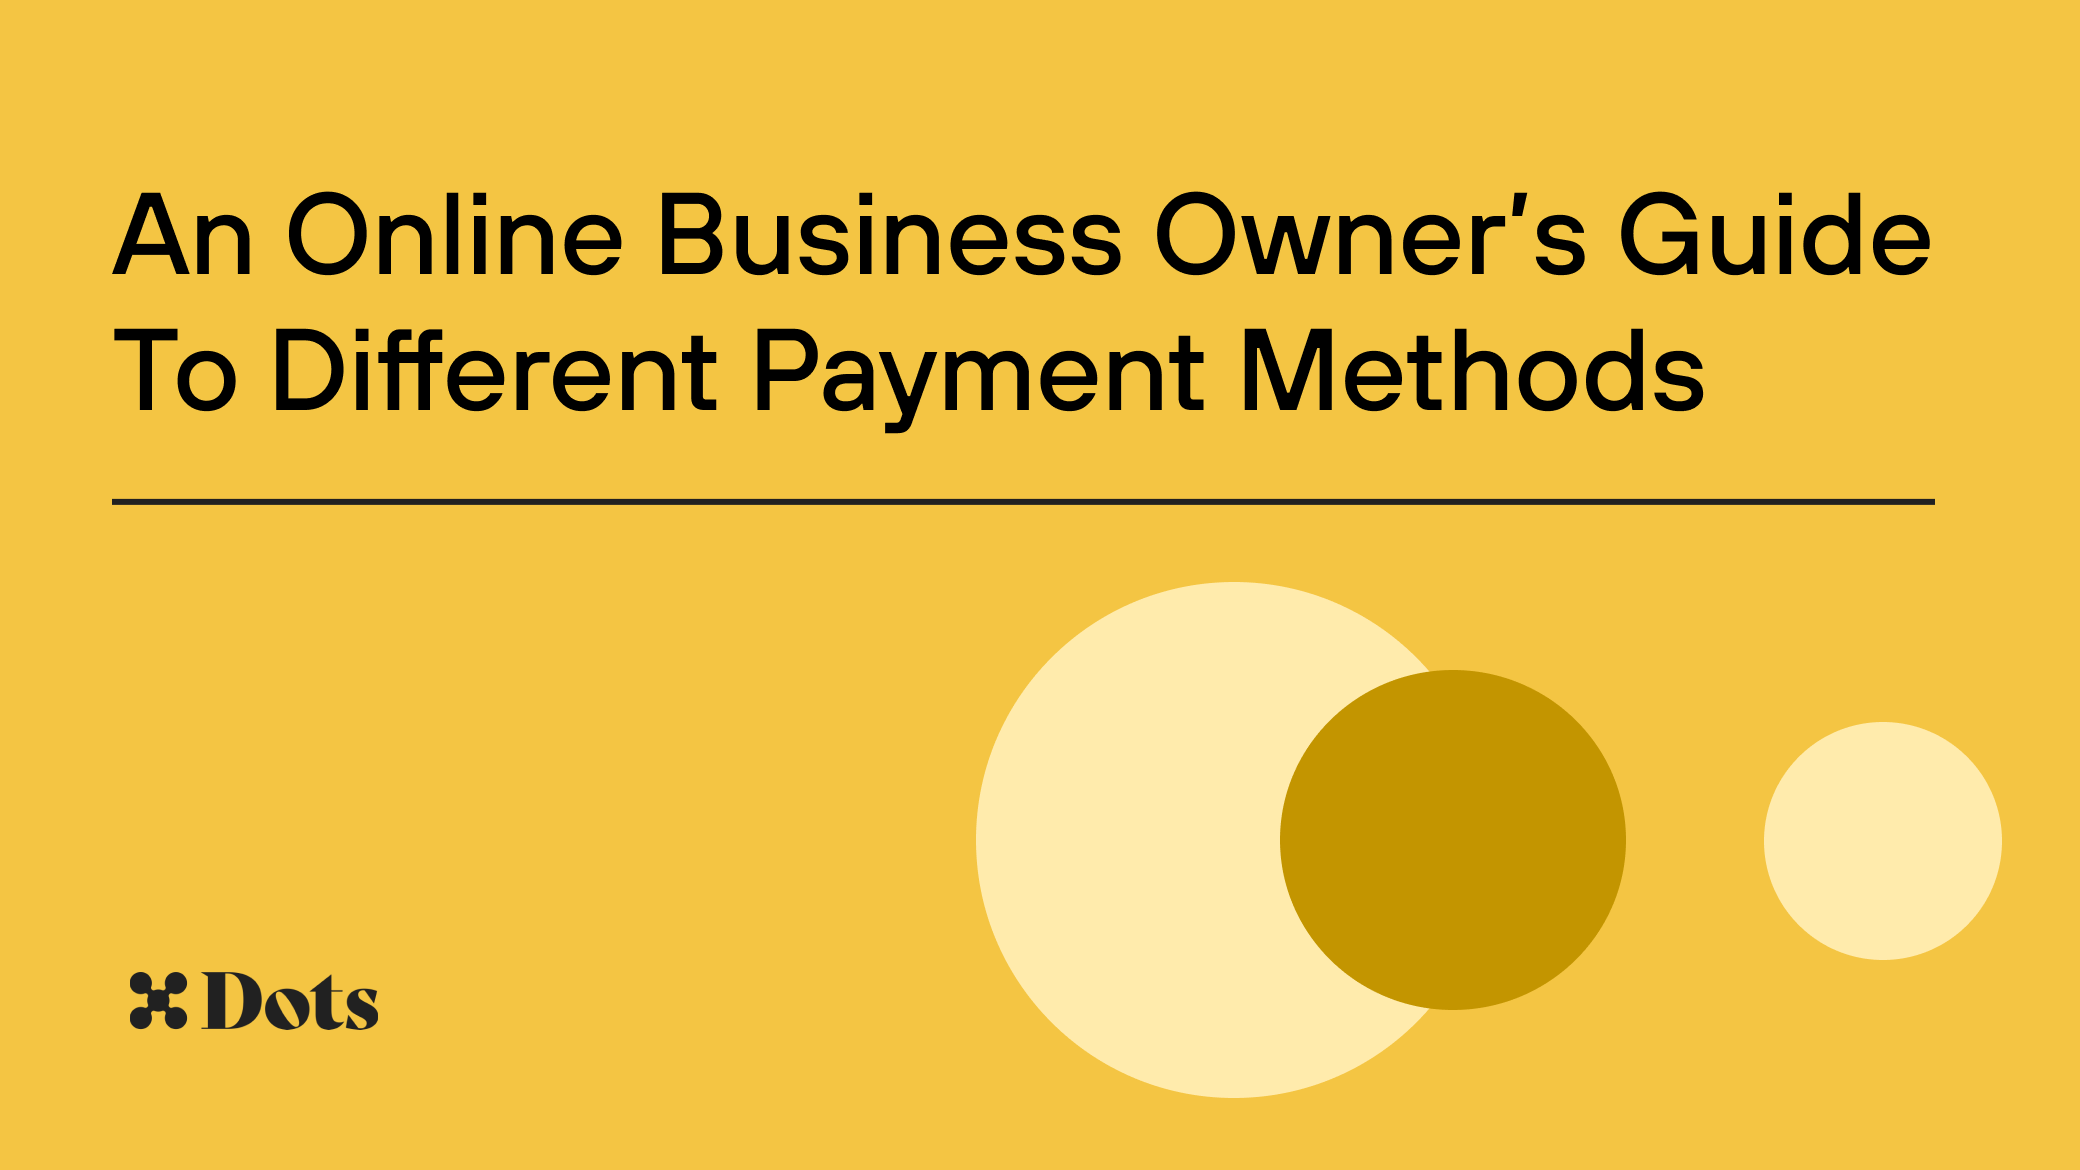 An Online Business Owner’s Guide to Different Payment Methods - Dots